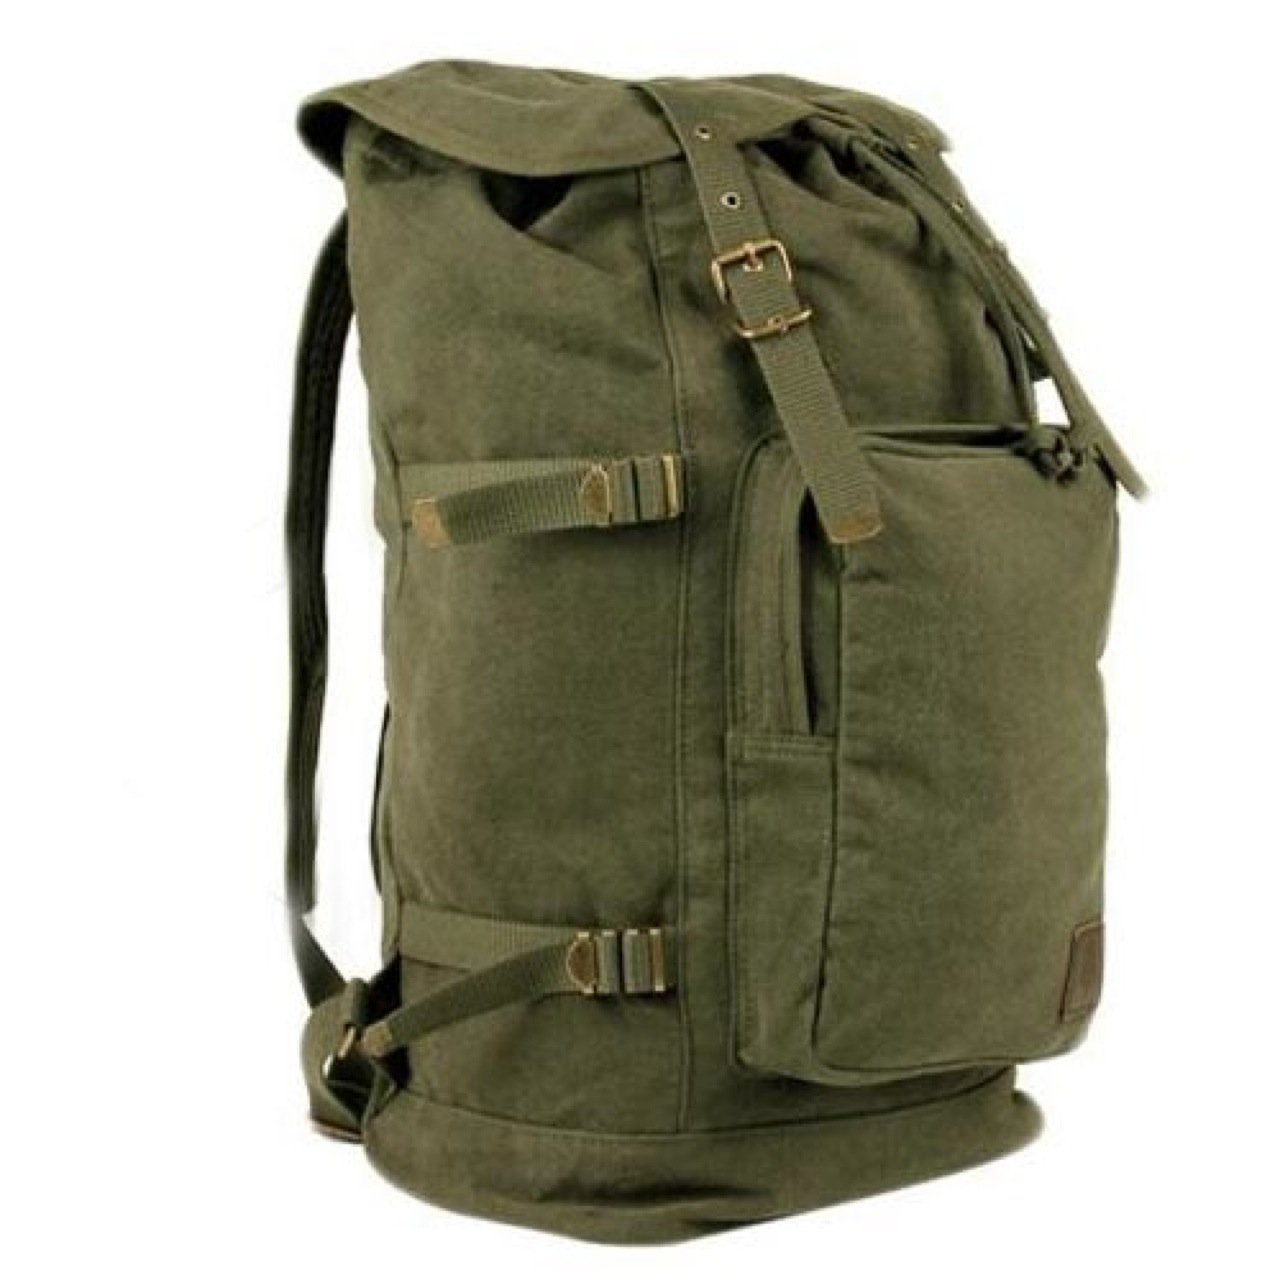 Vintage Military Style Canvas BackPack